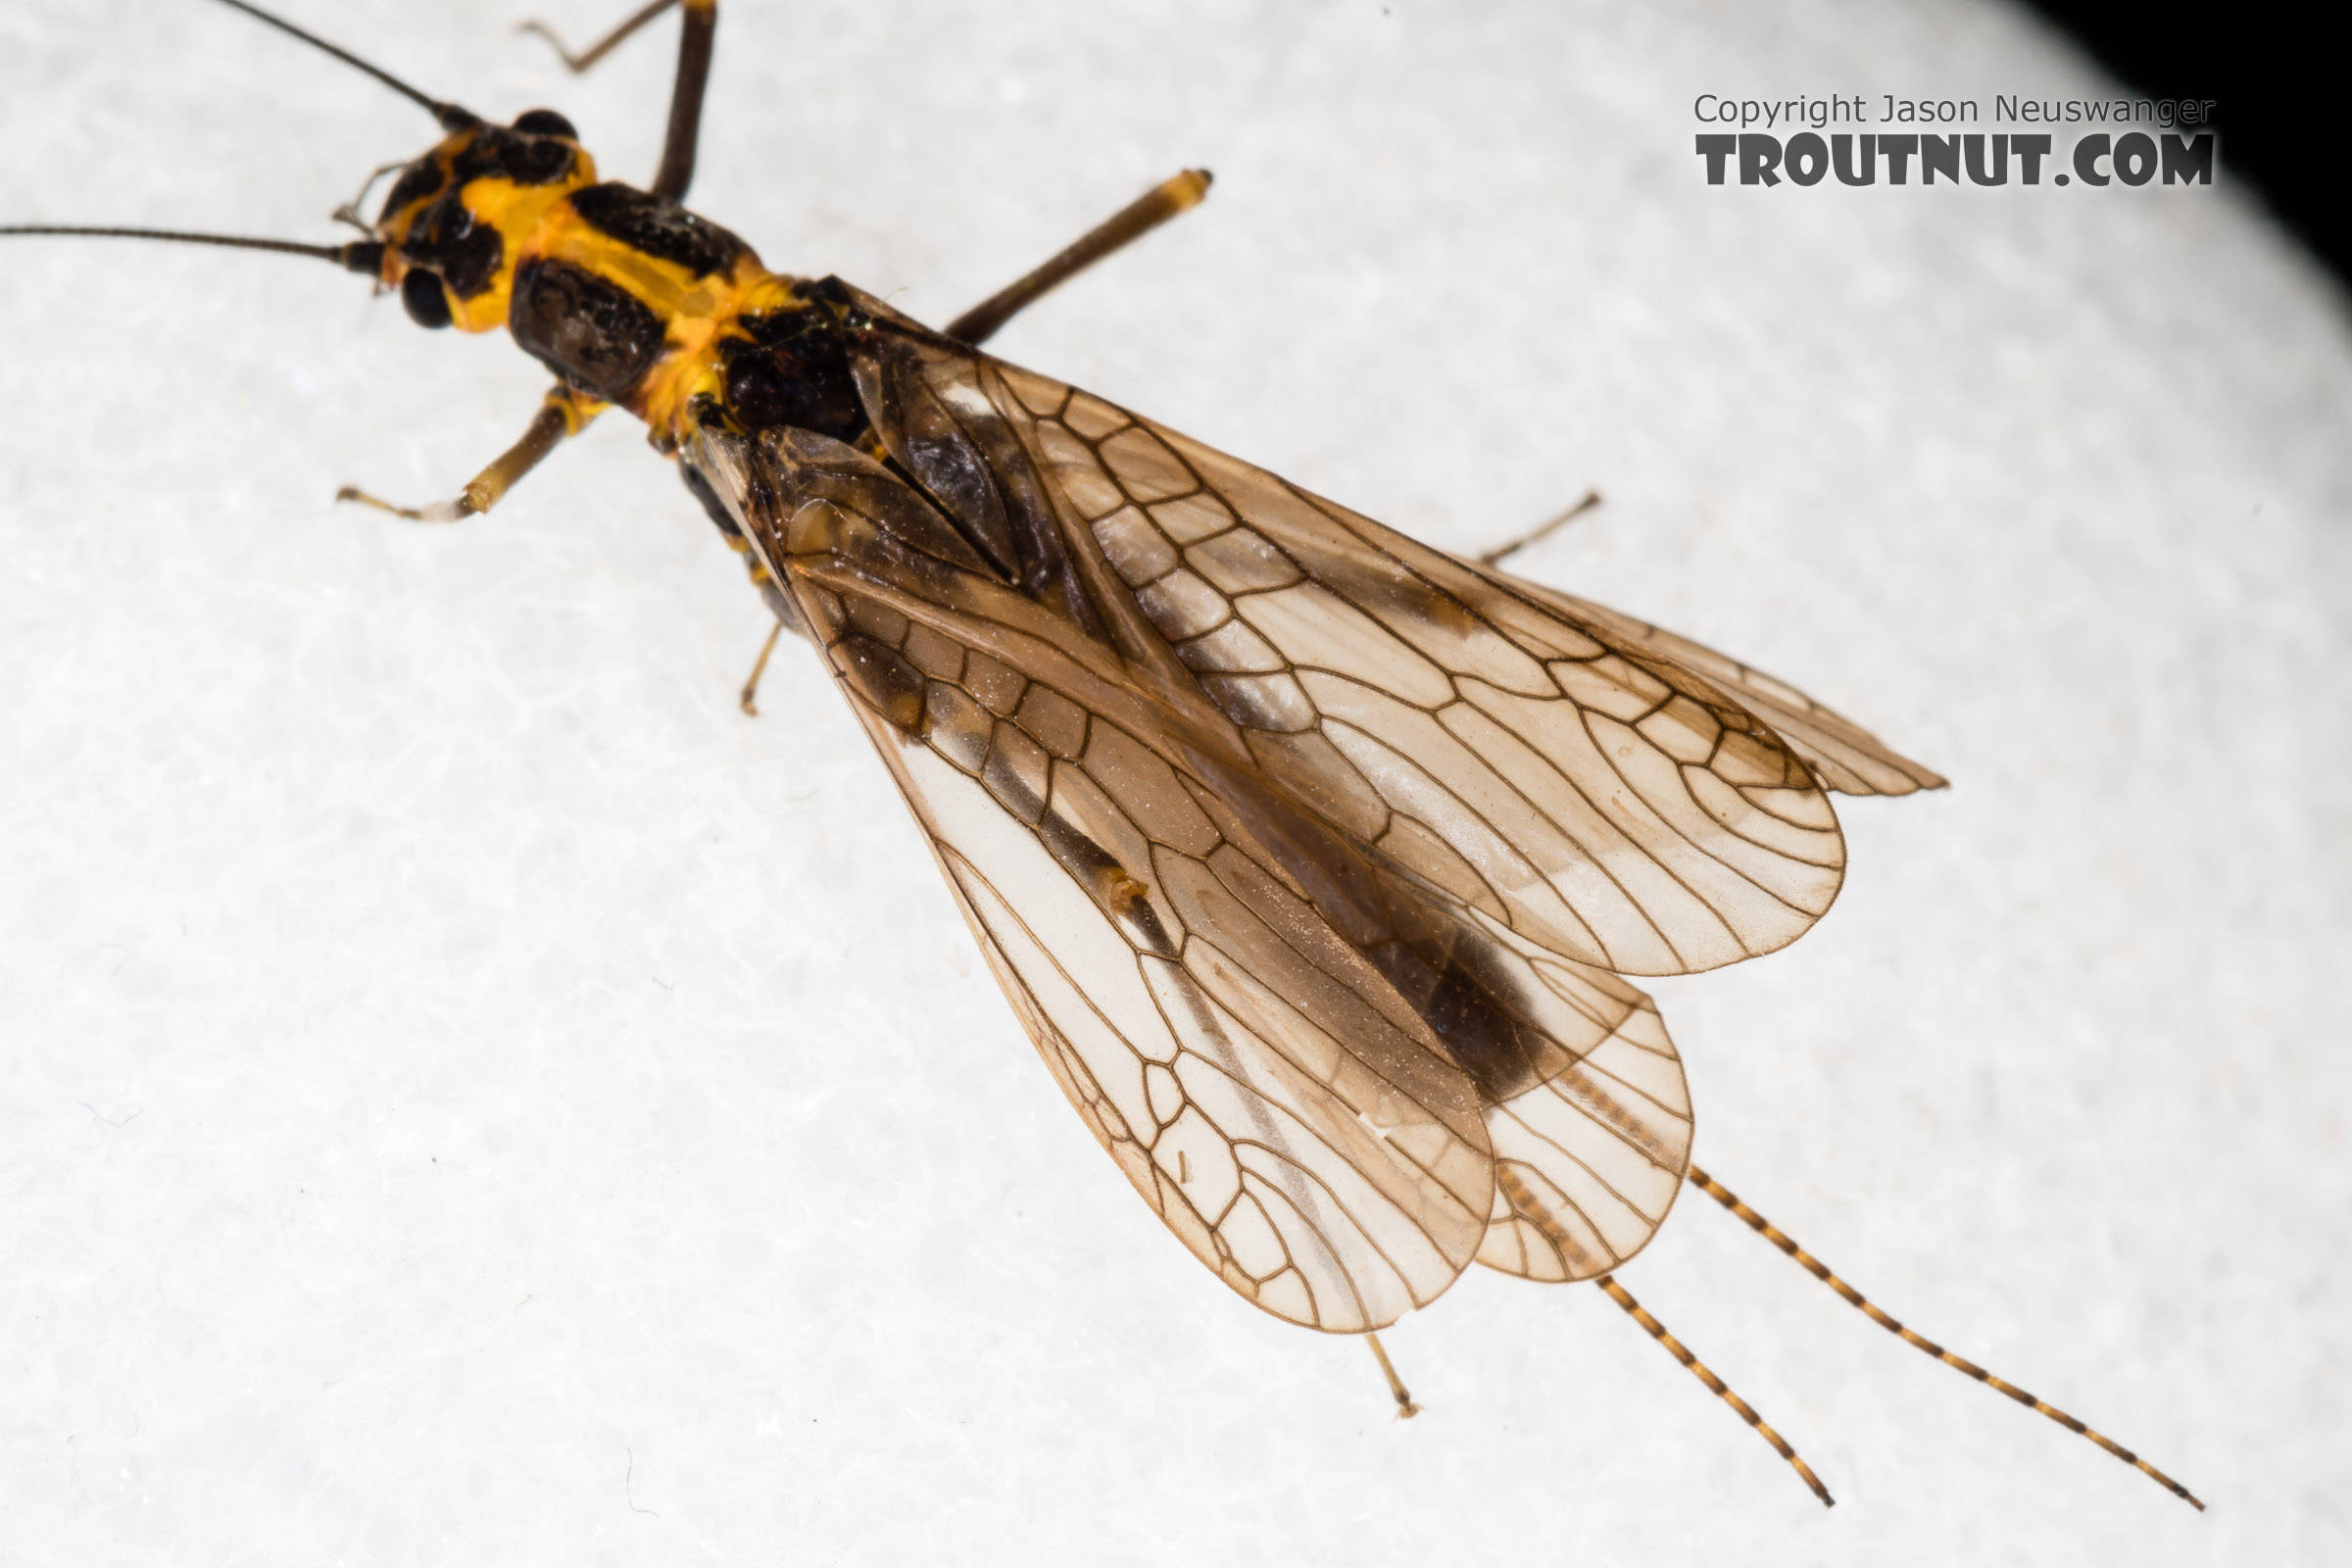 Female Pictetiella expansa Stonefly Adult from the South Fork Snoqualmie River in Washington